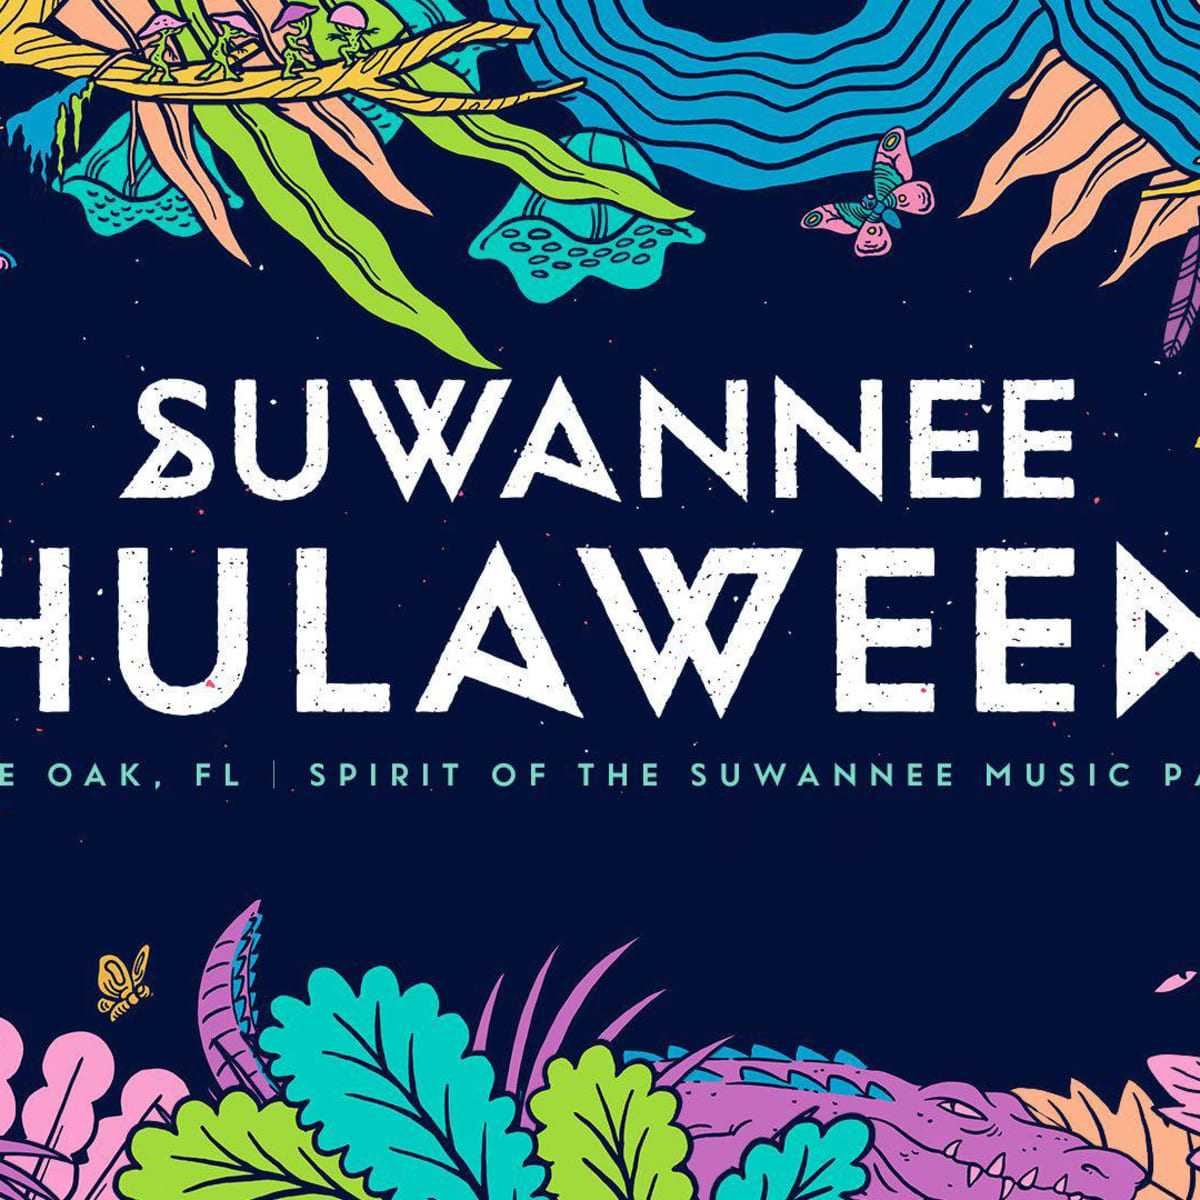 Hulaween Suwannee 2019 Posters 2 for 11.99 shipped